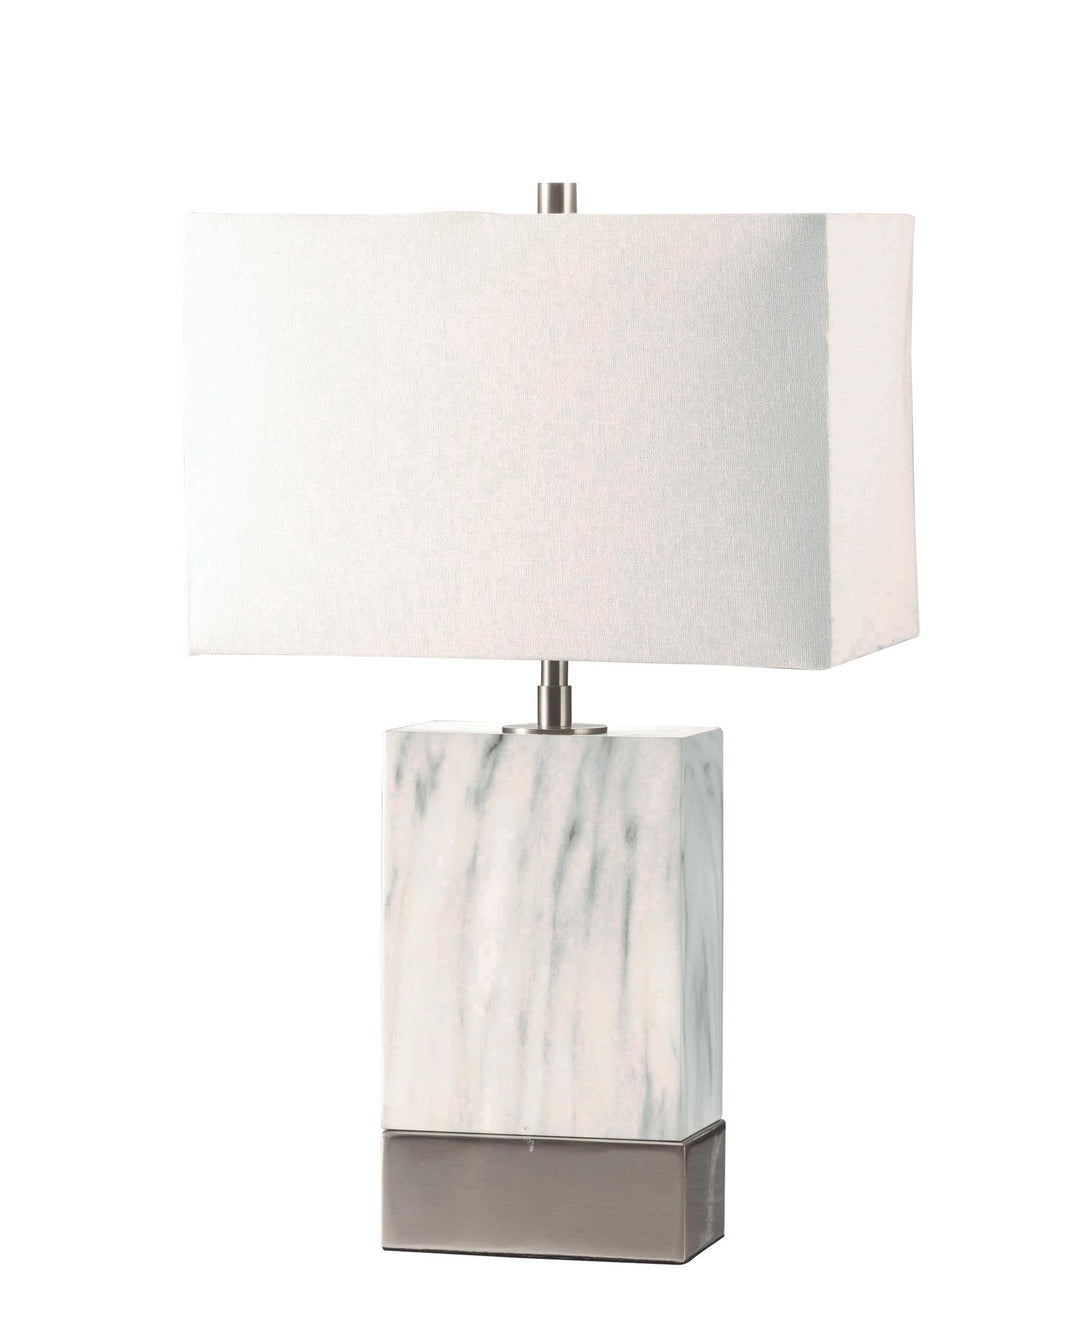 Libe Contemporary Table Lamp with Rectangular Base  -  N/A